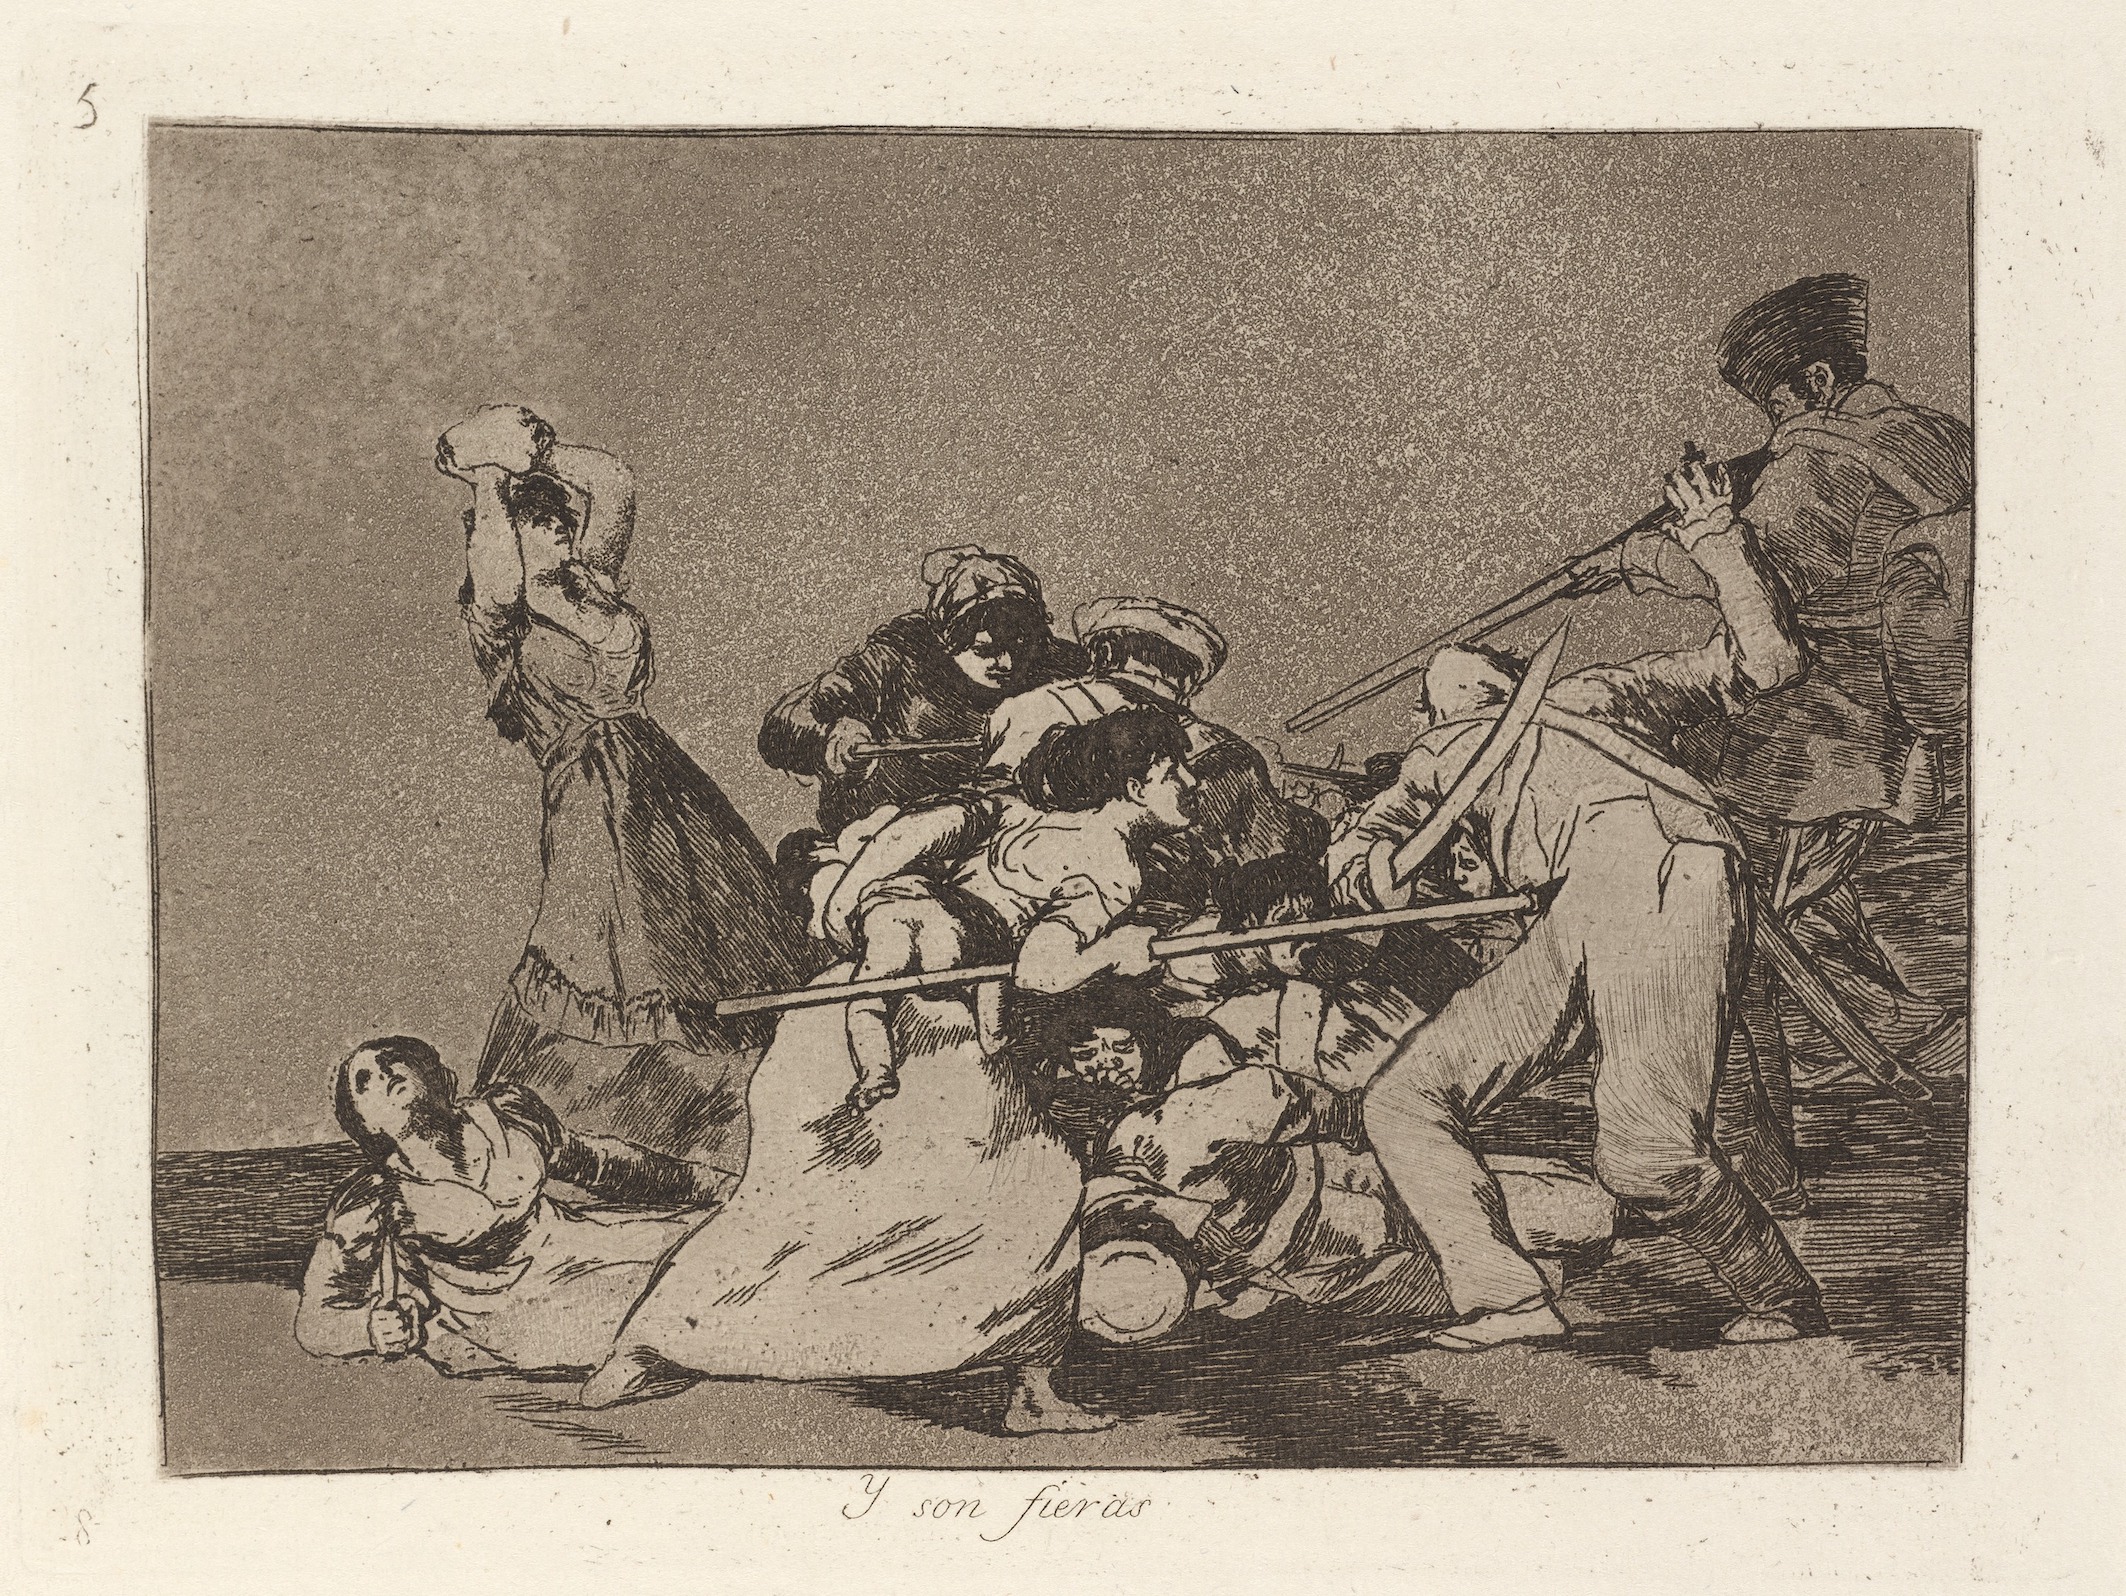 Figure 1: Francisco de Goya, Y son fieras (And they are like wild beasts)